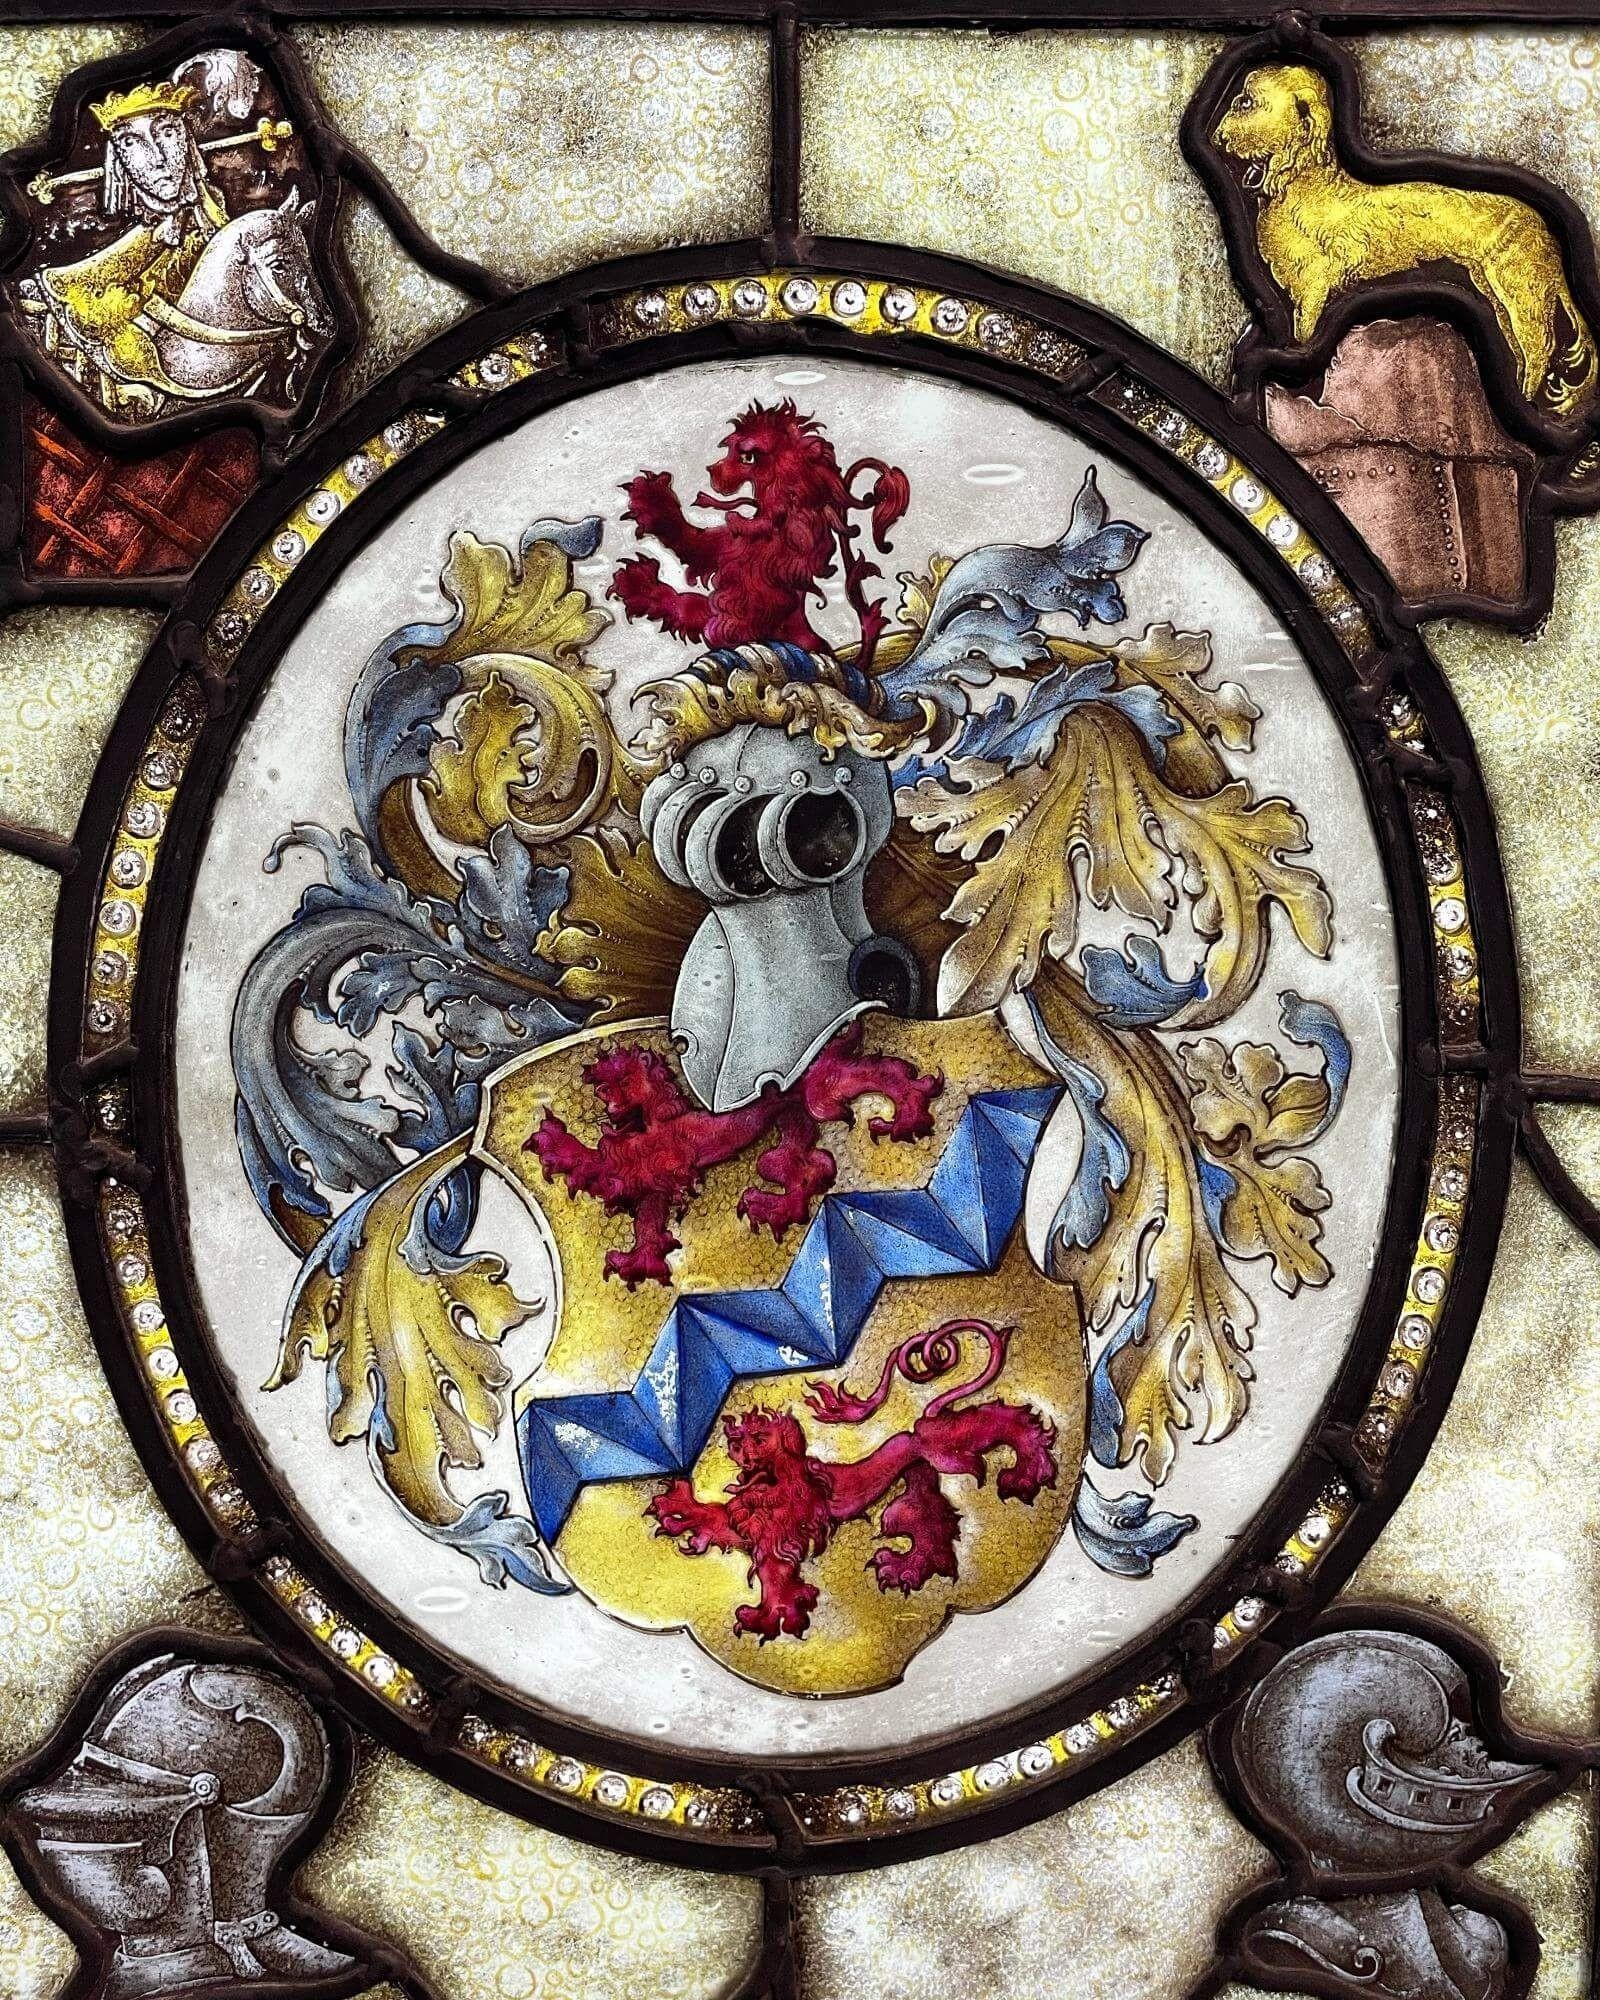 A fascinating early 19th century English heraldic stained glass window detailing an unidentified family crest, circa 1820. Dating from the Georgian era, this stunning stained glass window is over 200 years old. The central crest, depicting a yellow